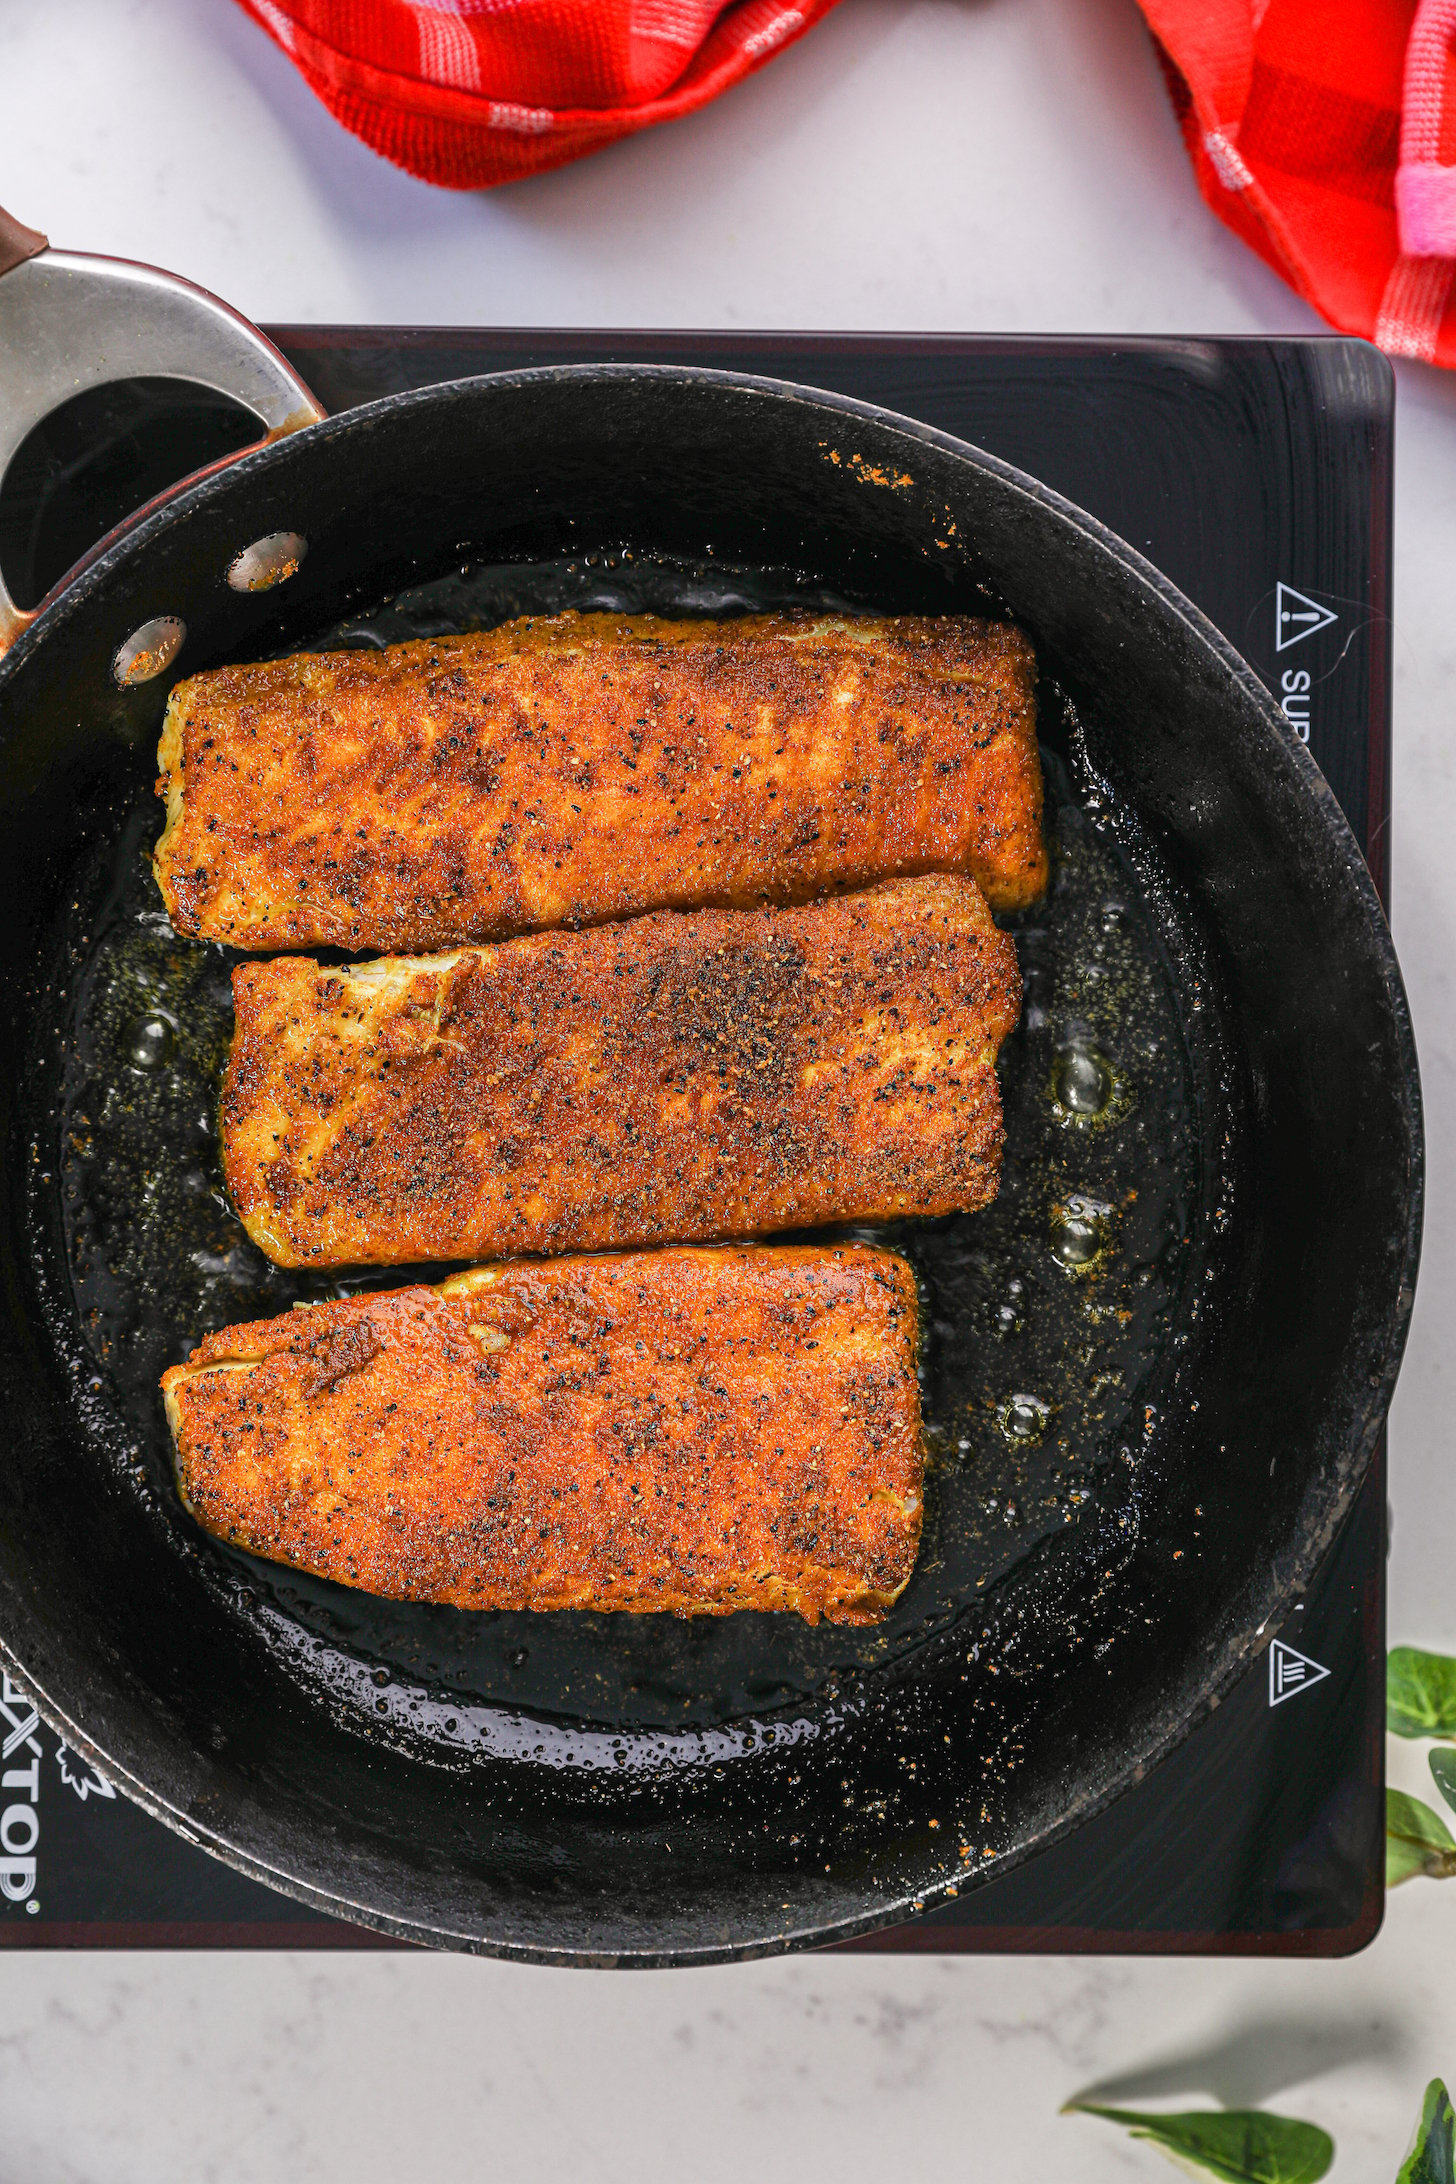 Three spice-coated fish fillets frying in a pan of oil.